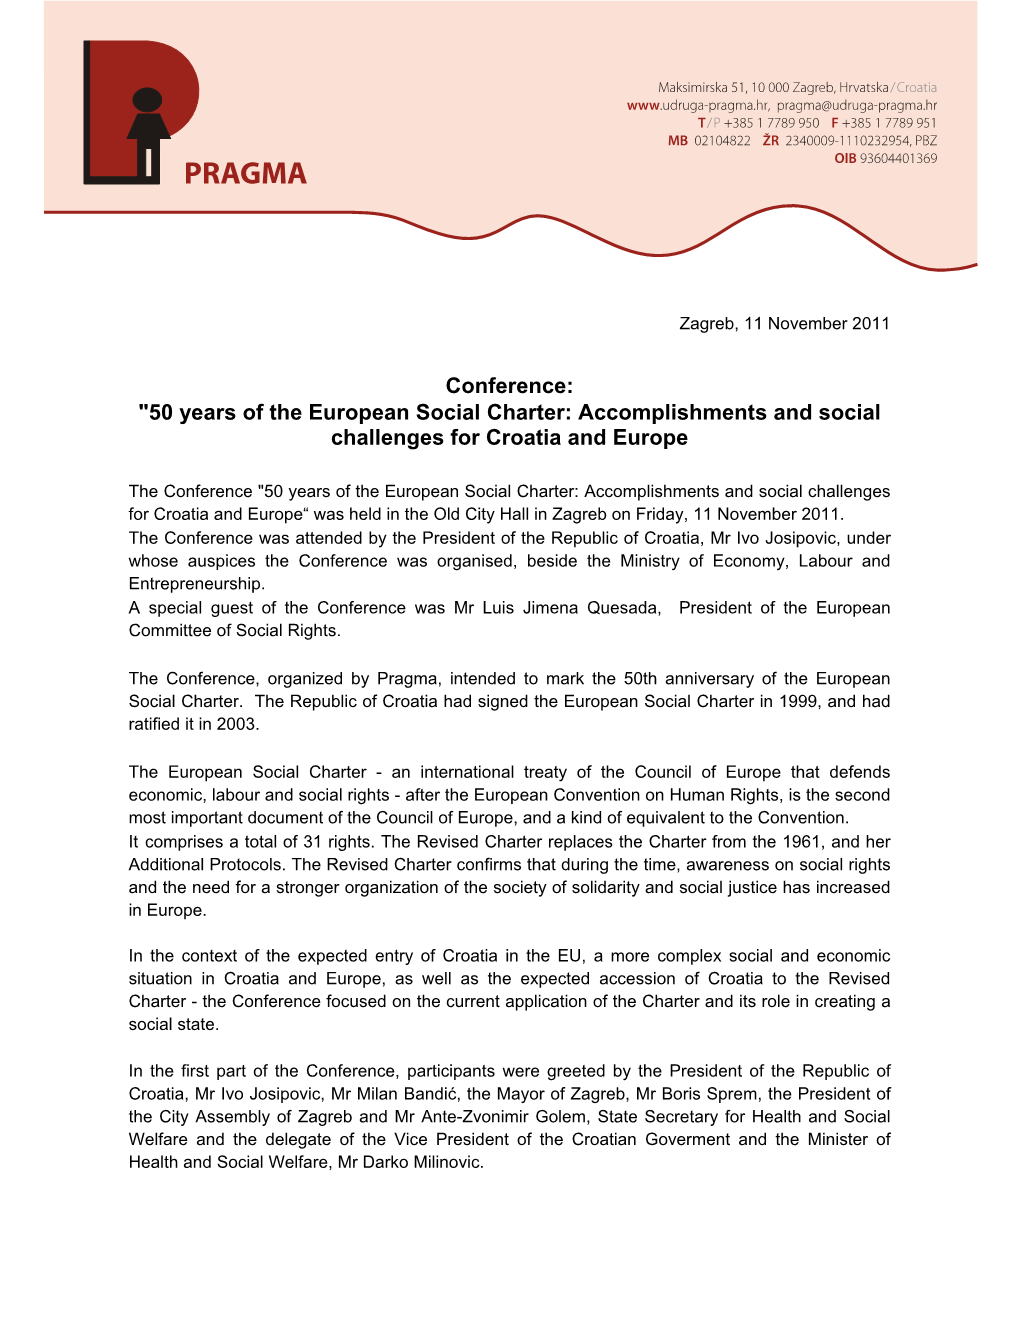 Conference: "50 Years of the European Social Charter: Accomplishments and Social Challenges for Croatia and Europe